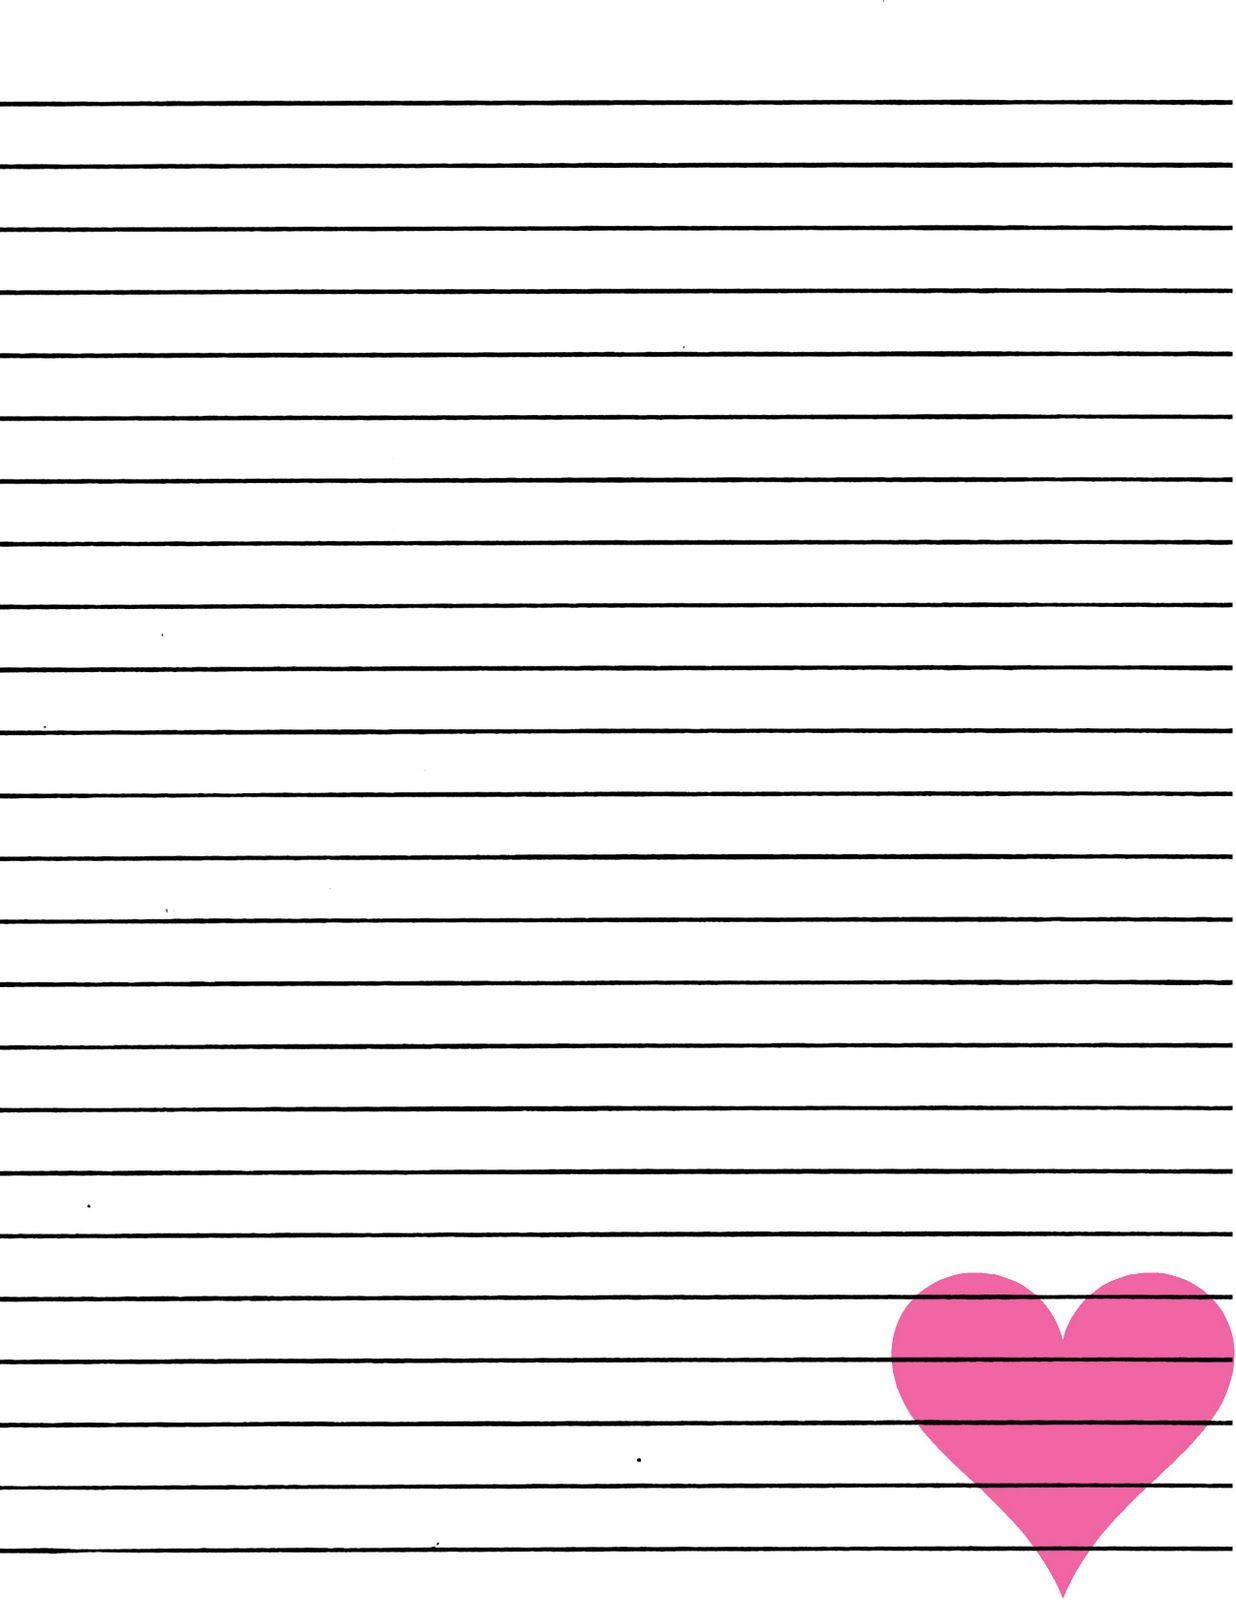 Printable Lined Paper Free Printable Stationery Writing Paper Printable